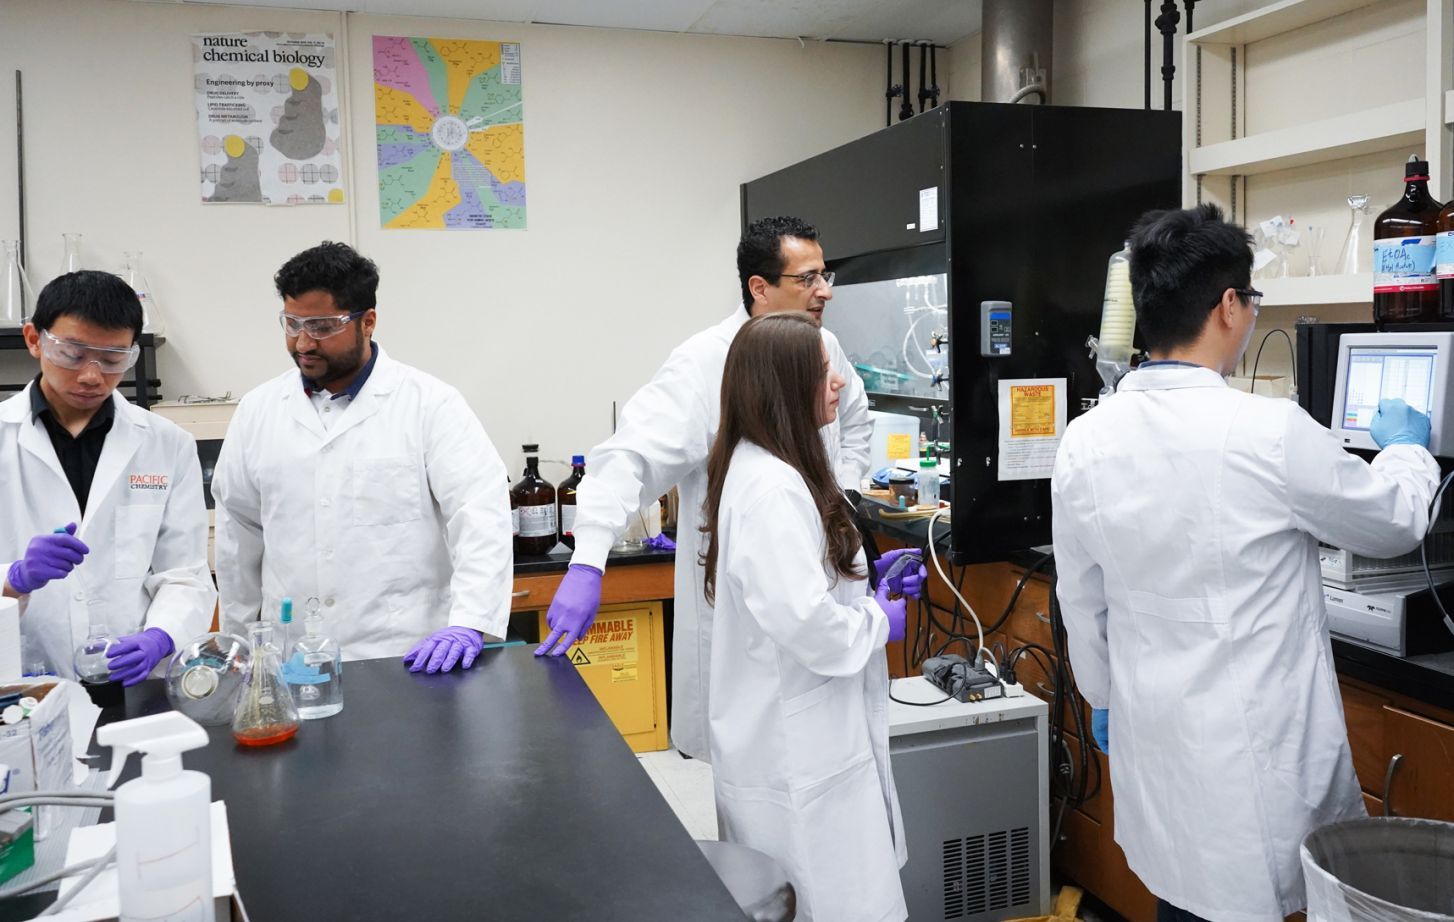 Professor Alhamadsheh and research assistants in the lab